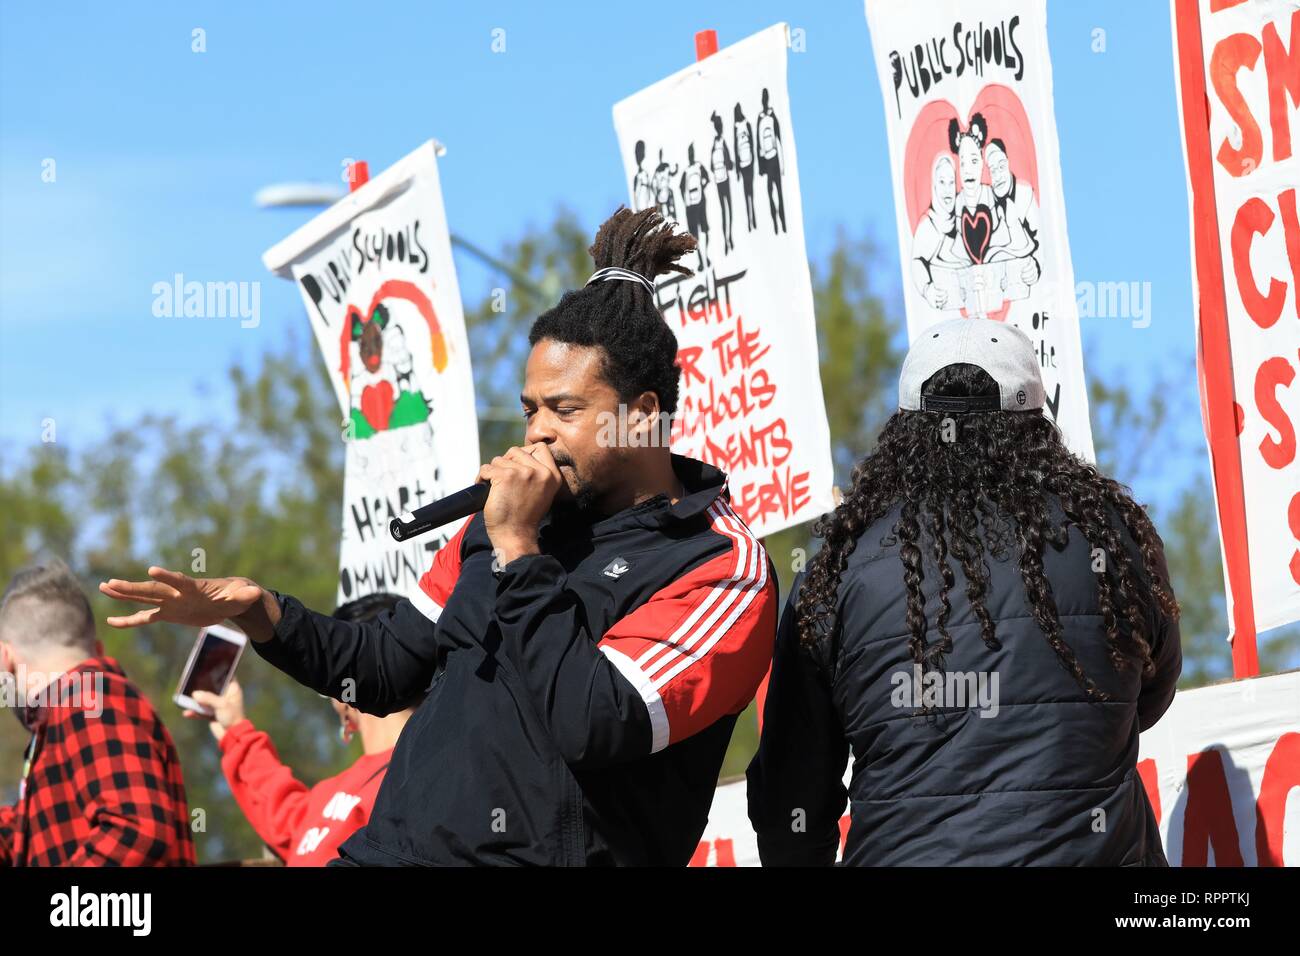 DeFremery Park, Oakland, California, USA February 22, 2019  Hip hop group Zion I with Baba Zumbi performs in support of Oakland teachers.    OUSD, Oakland Unified School District Teachers are striking for better pay, smaller classrooms, more support for students and against privatization of schools.   Credit: Caryn Becker/Alamy Live News Stock Photo